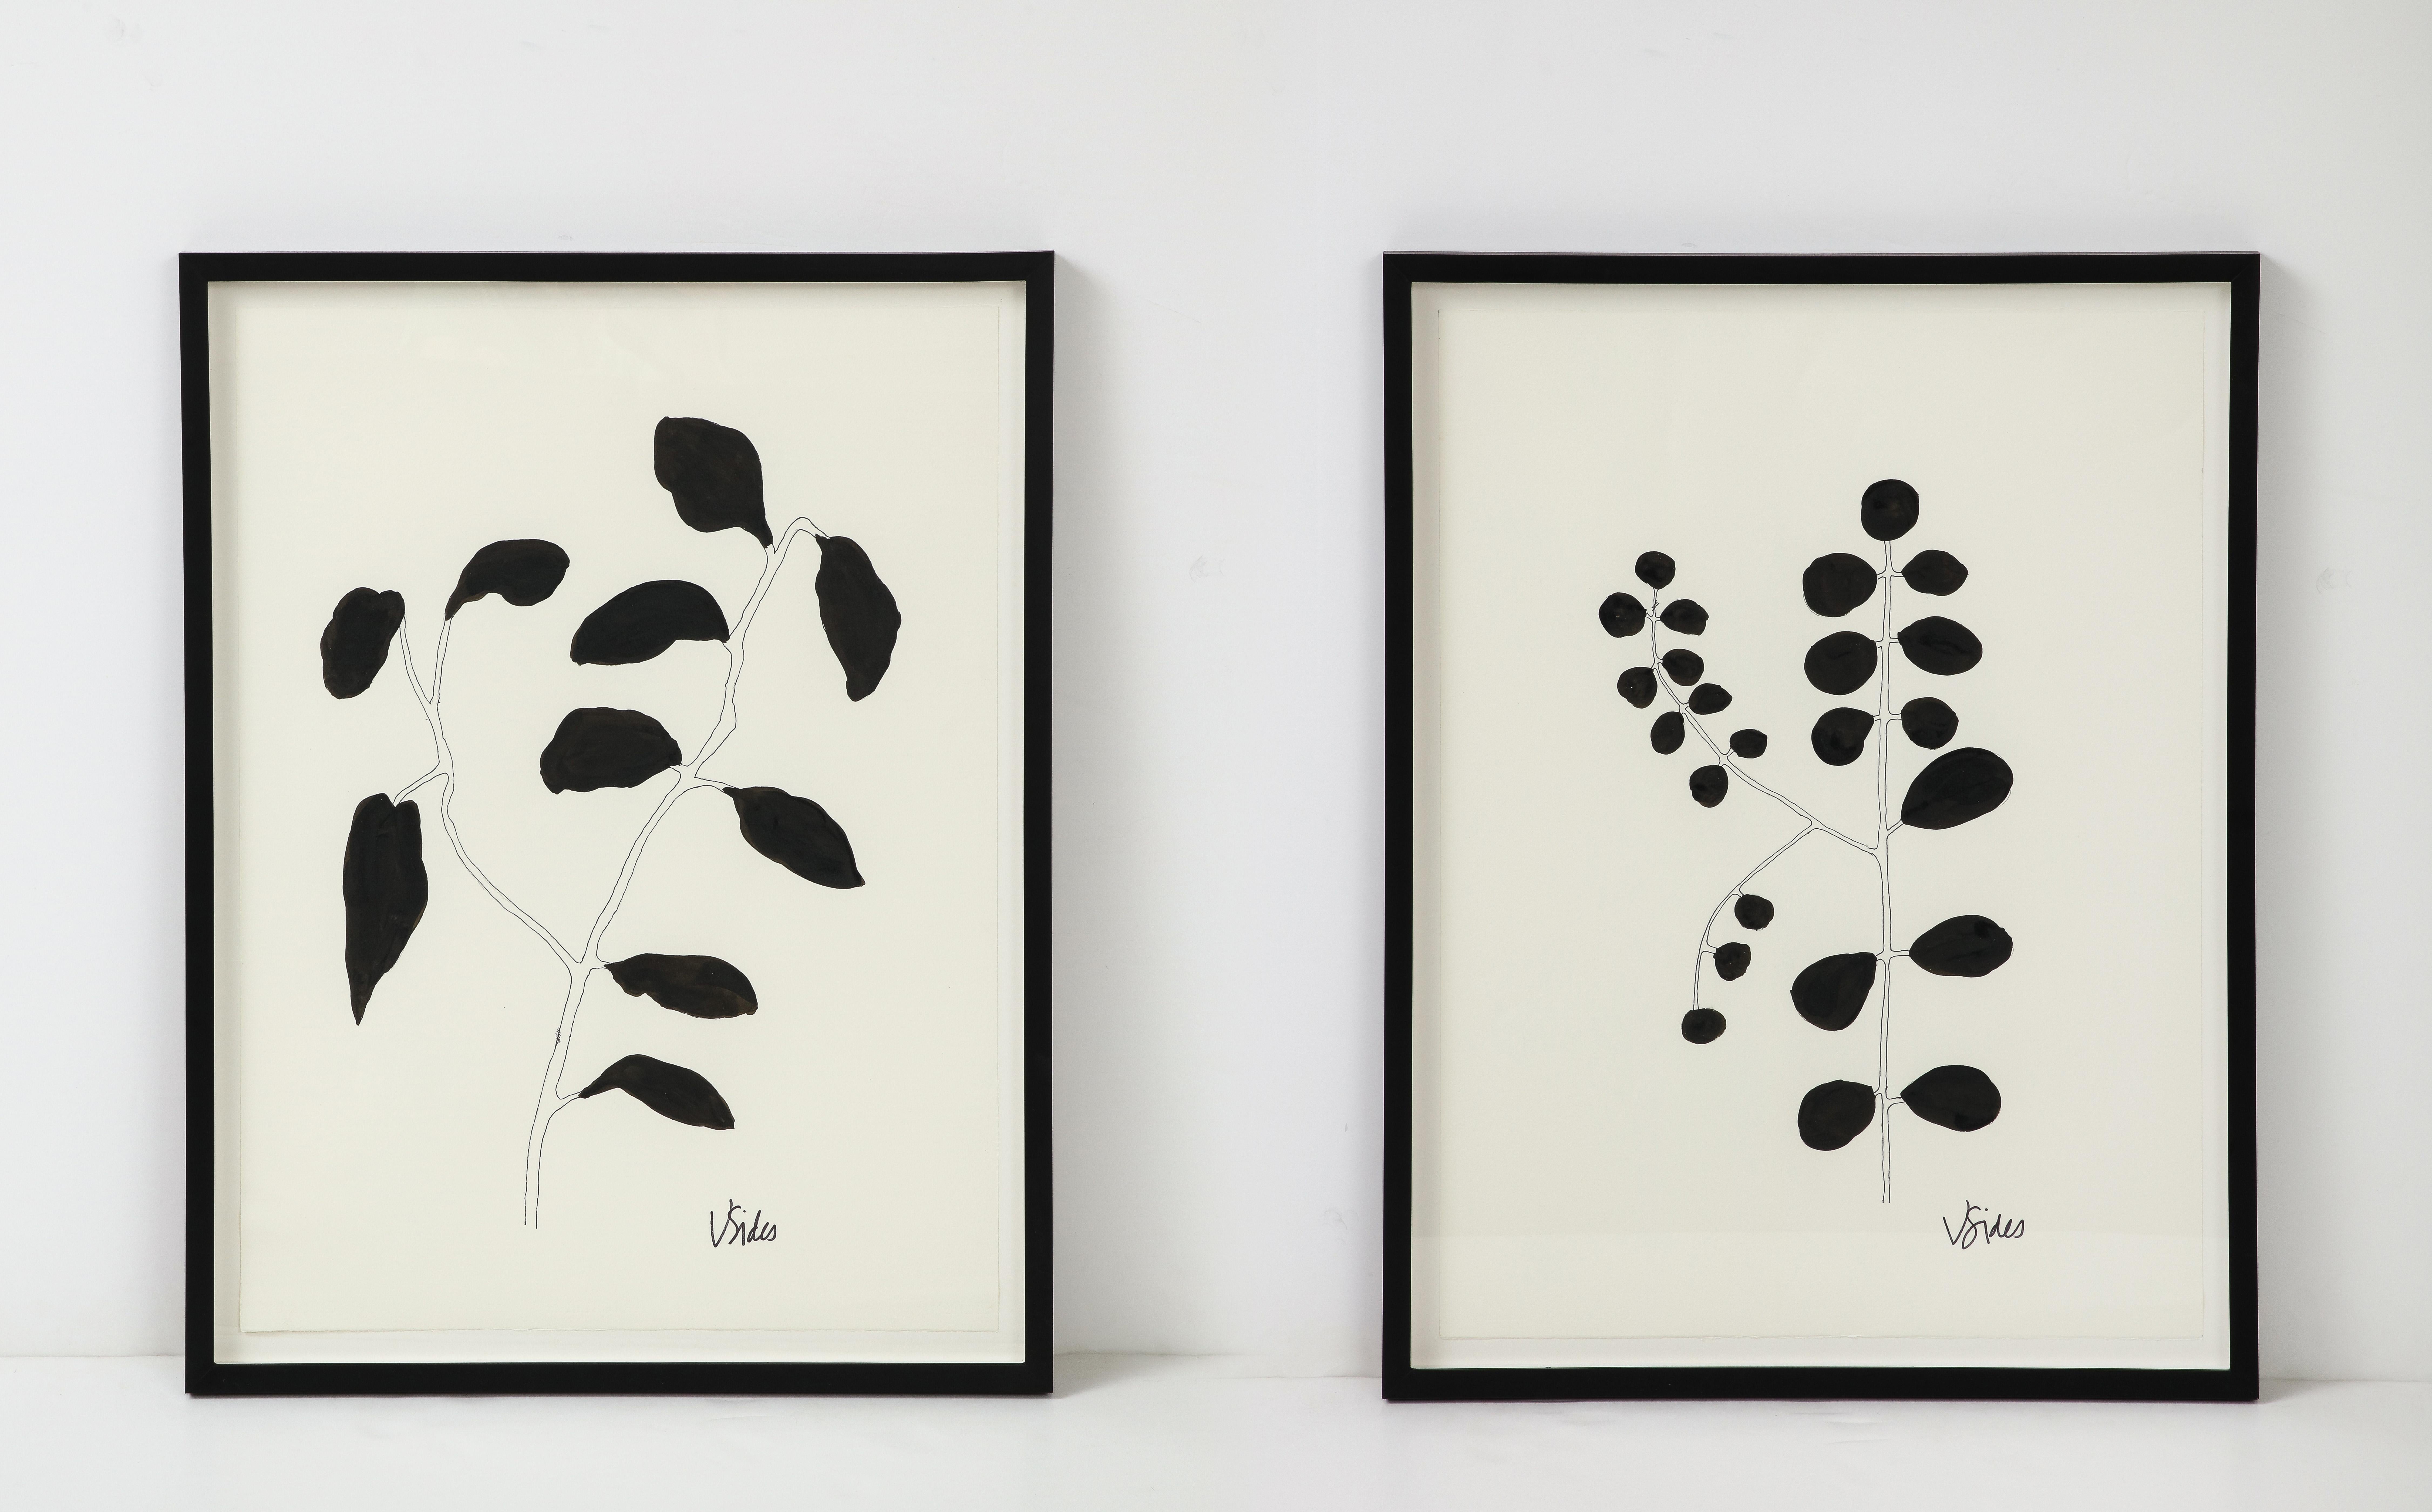 We love the graphic simplicity of these works of art. Created and signed by Georgia artist Victoria Sides, the works are stylized interpretation of leafy flowers. Each is different, but work well in a pair. Their neutral color allows them to go